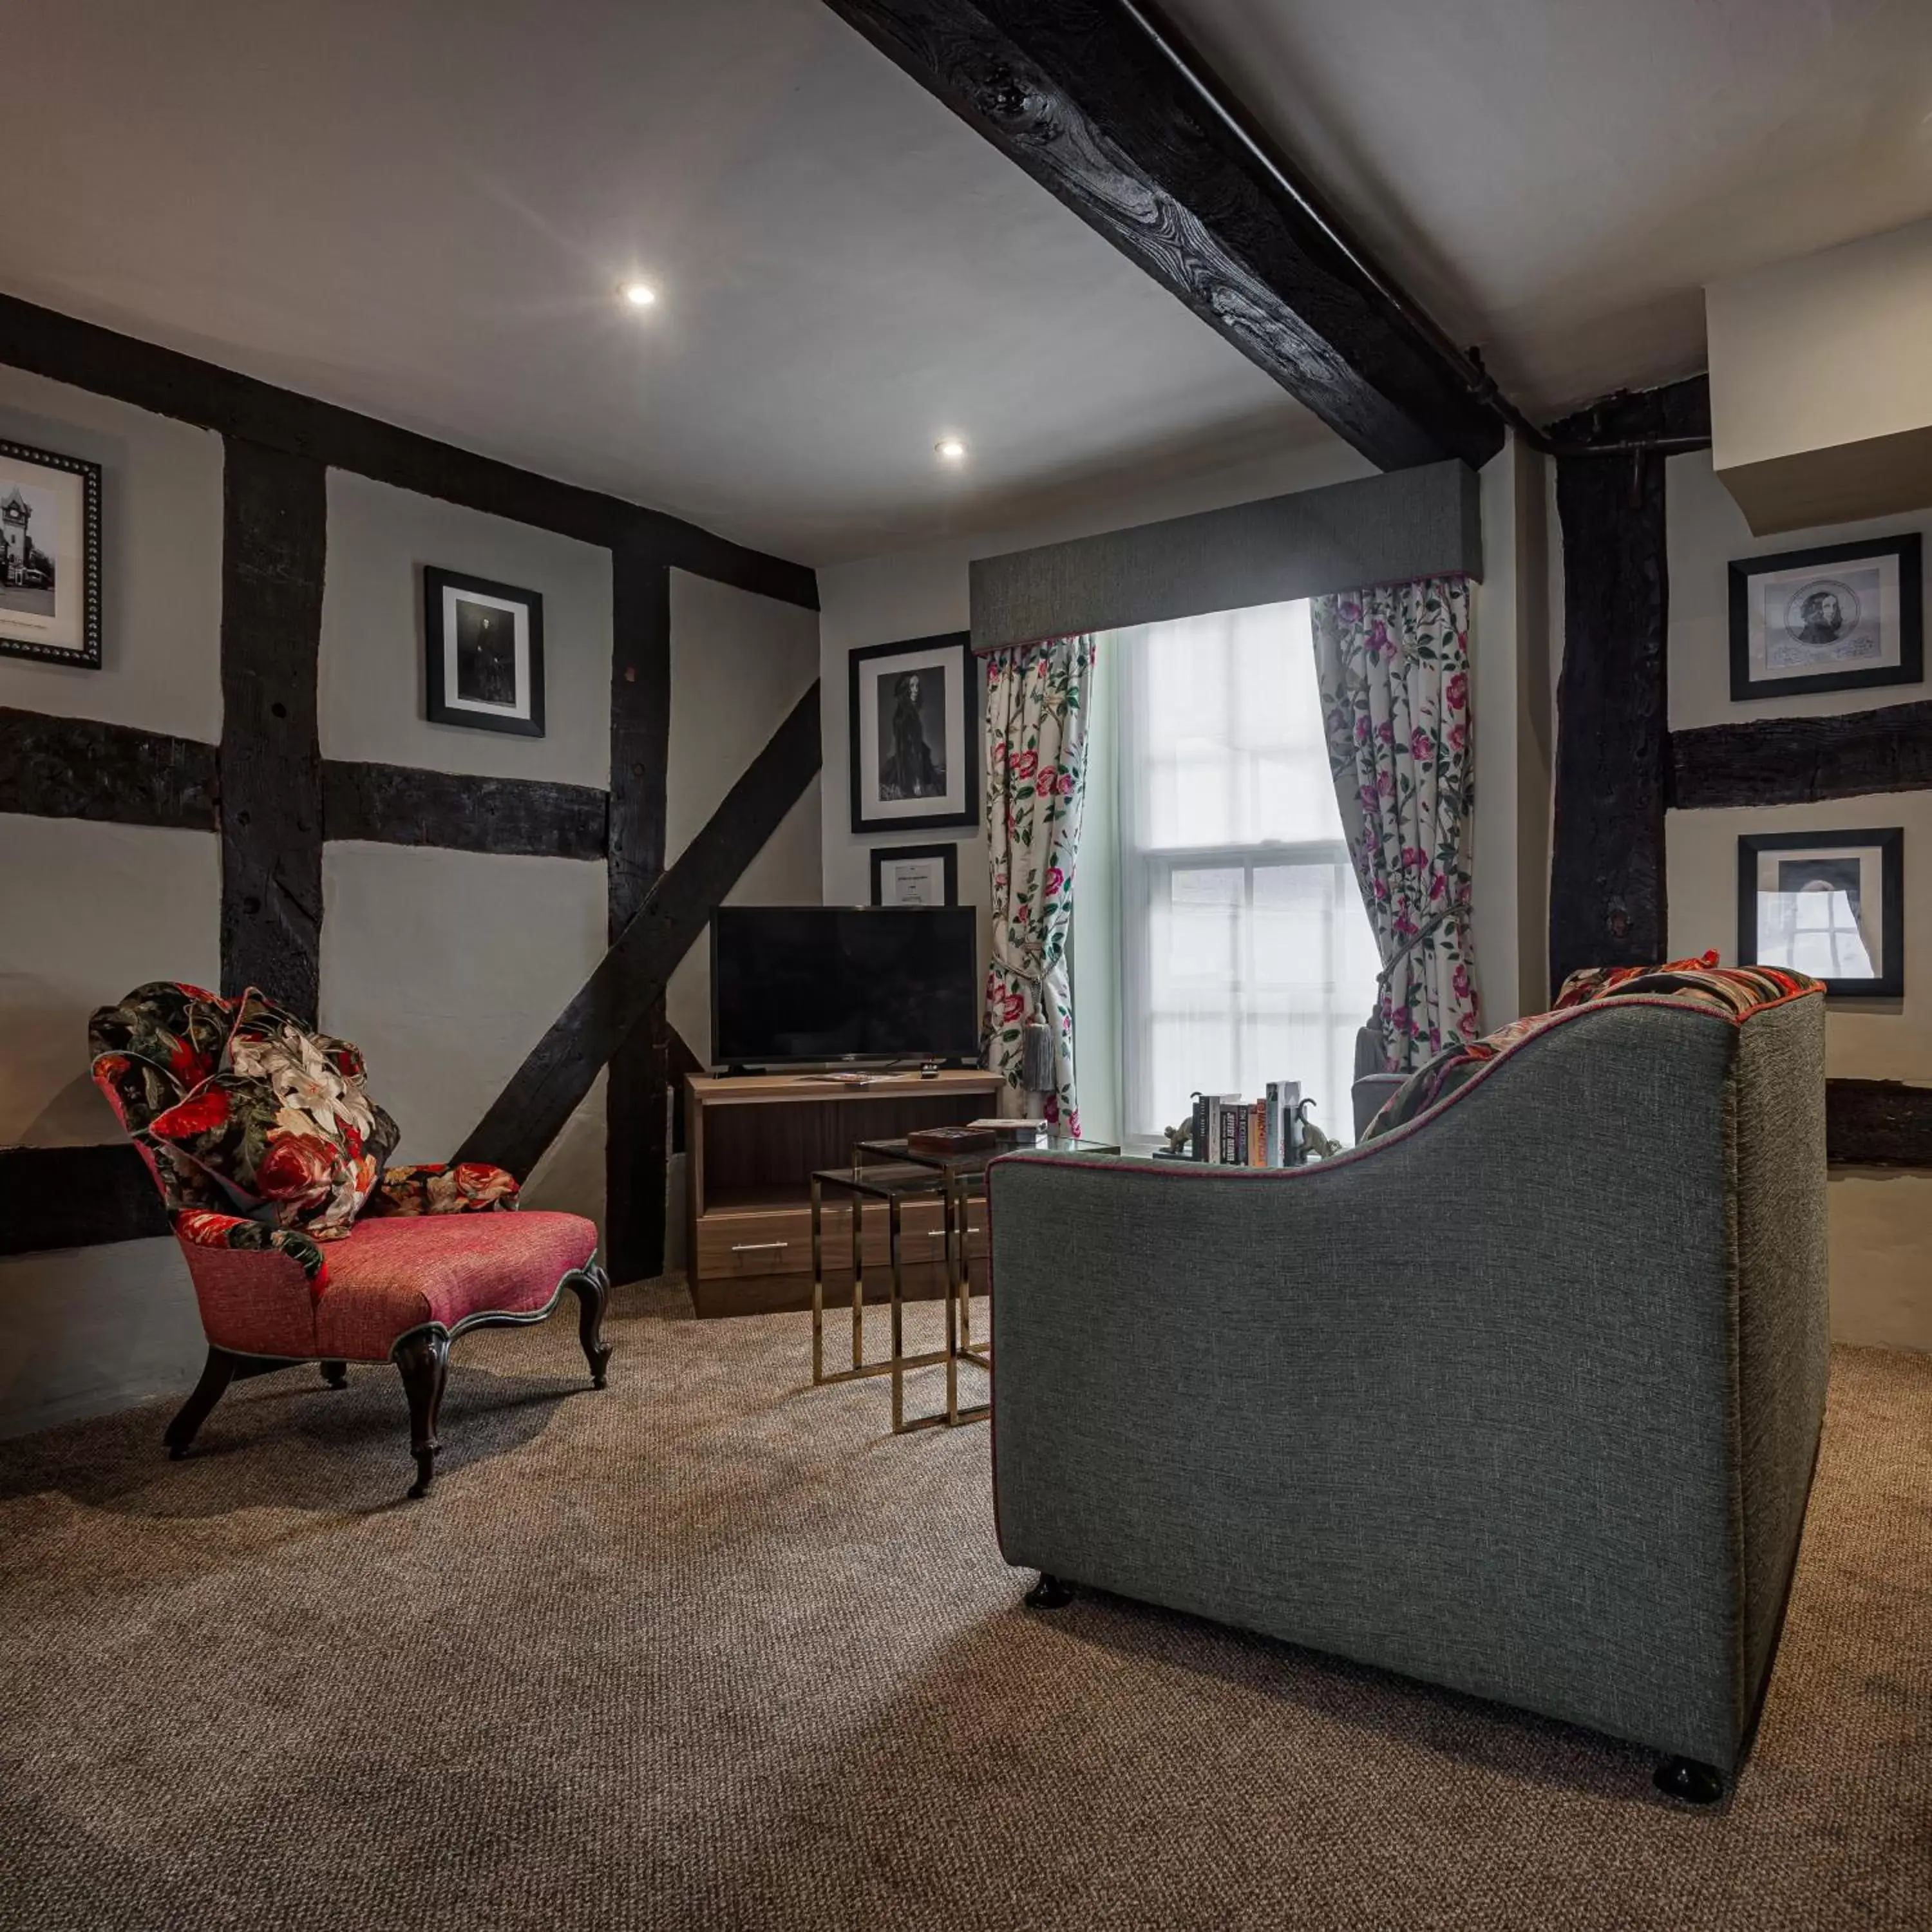 Seating Area in The Feathers Hotel, Ledbury, Herefordshire